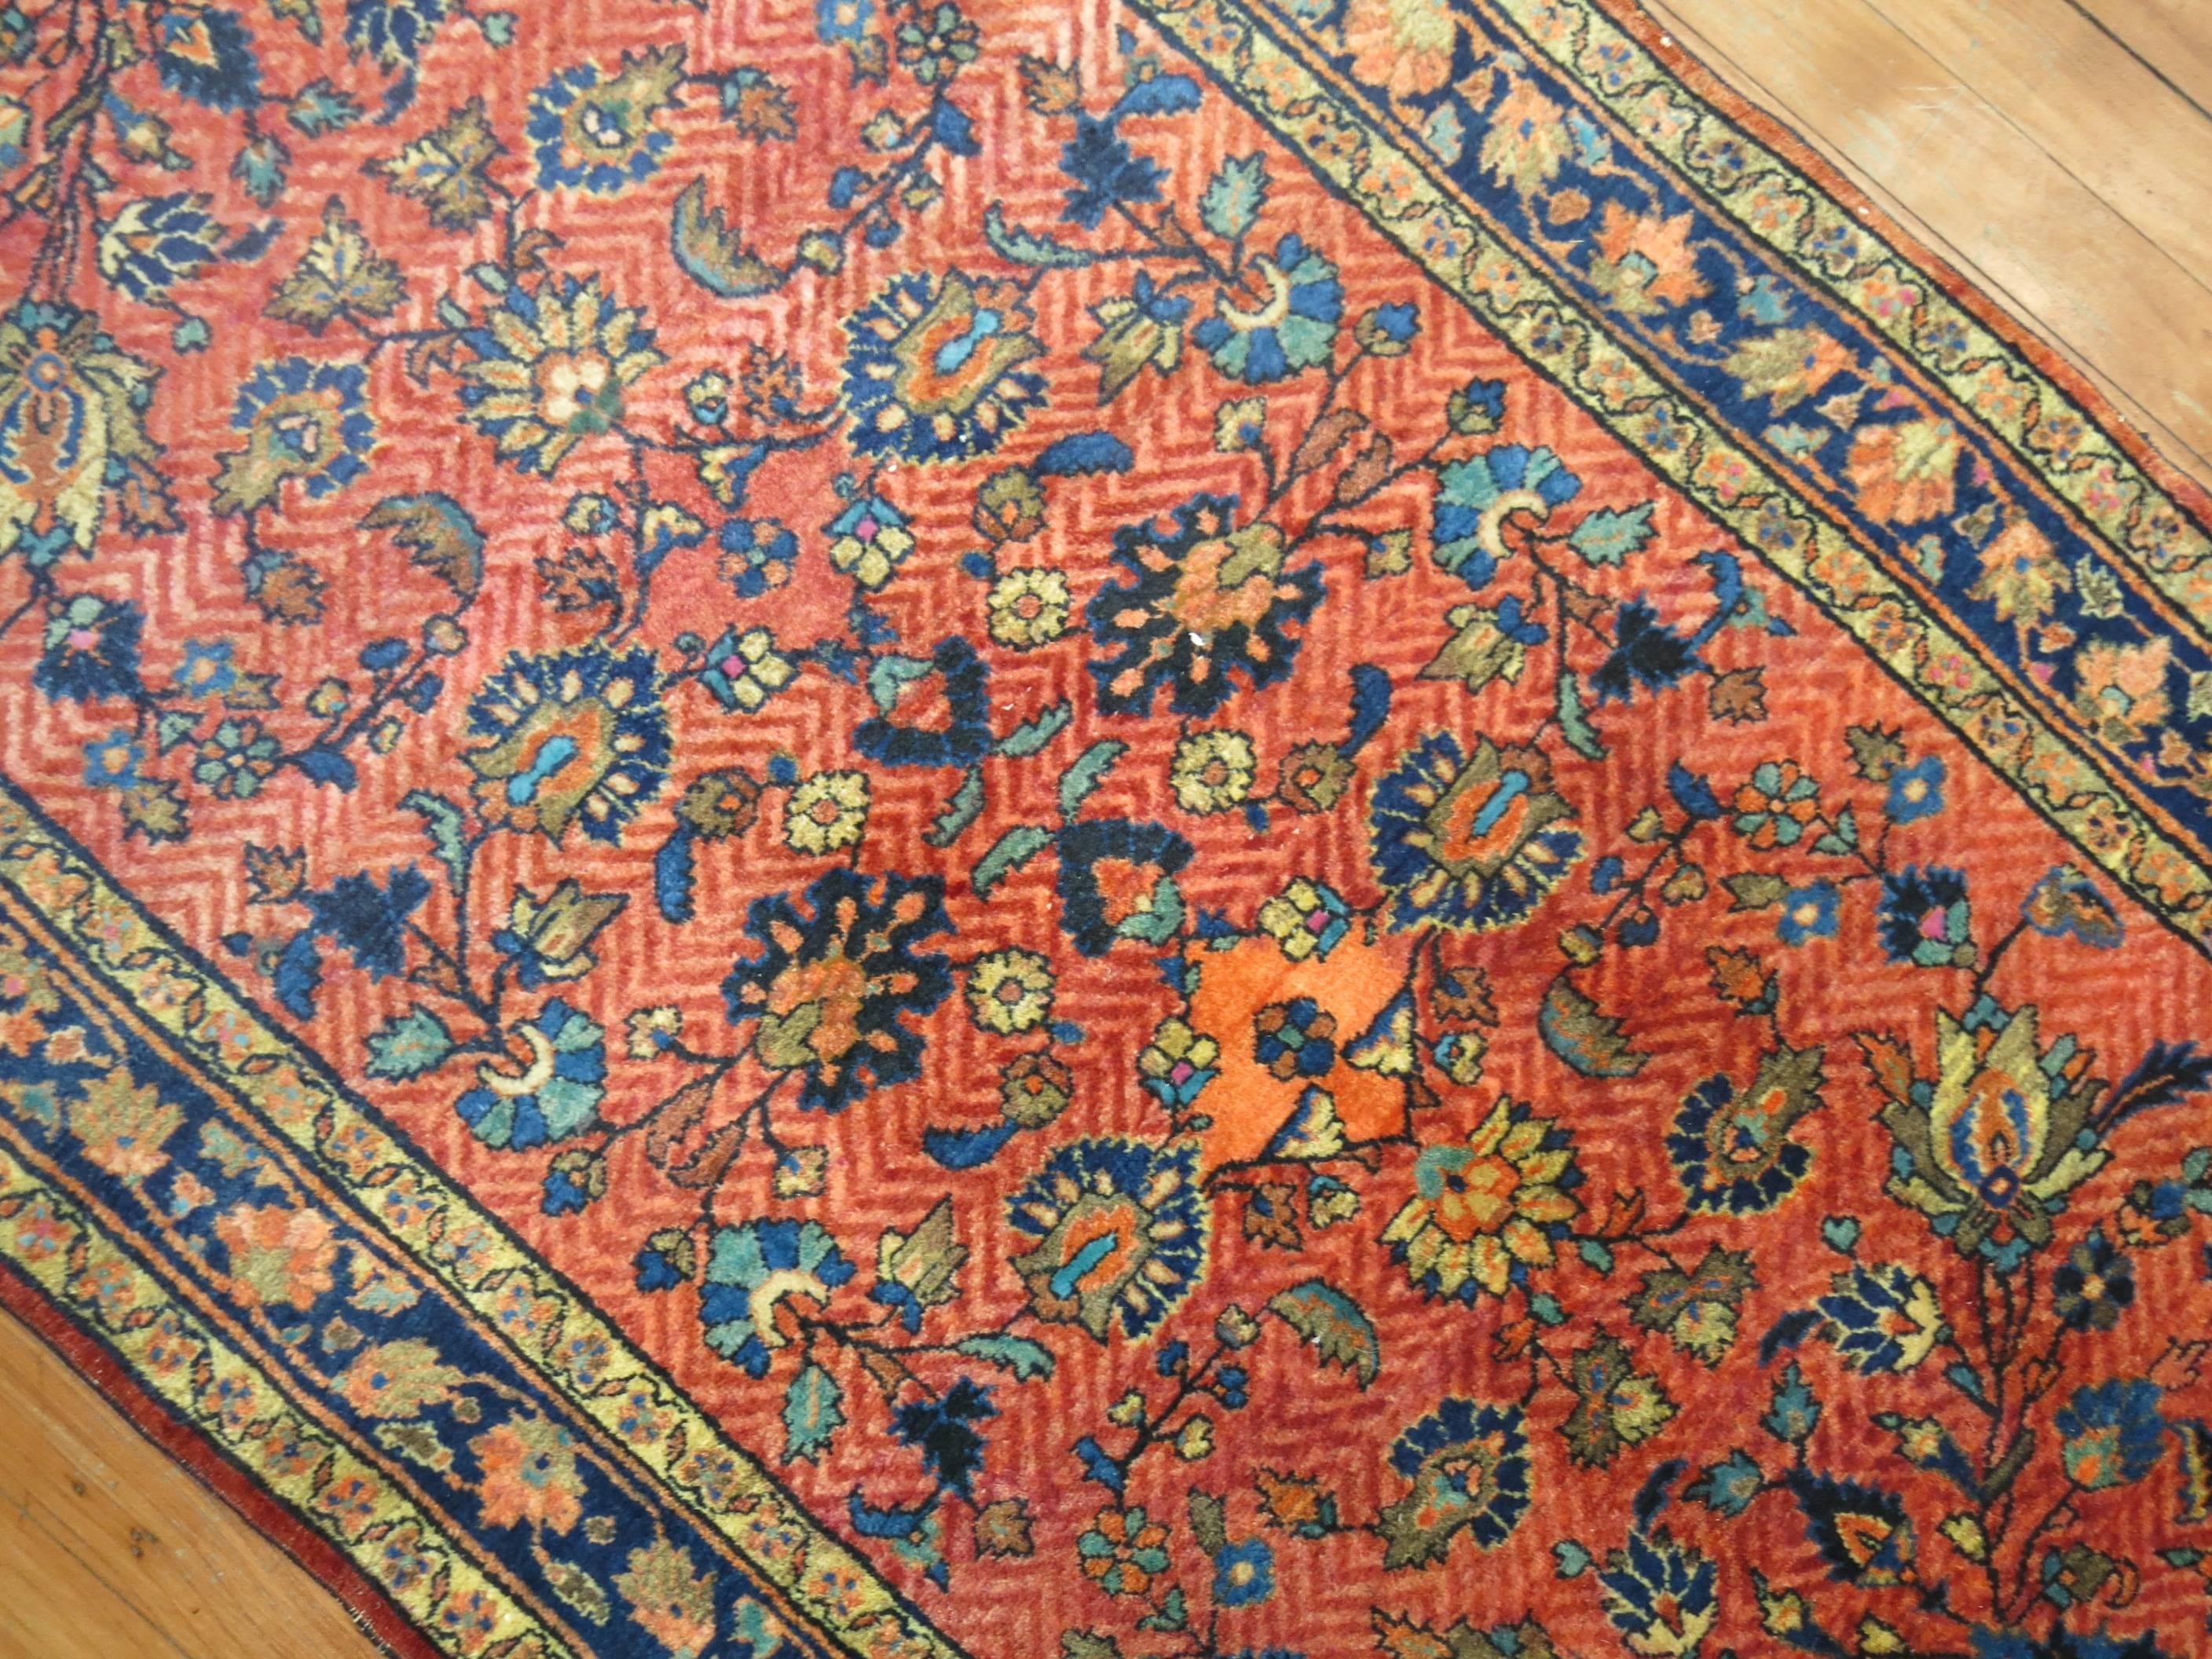 Hand-Woven Traditional Antique Persian Sarouk Runner